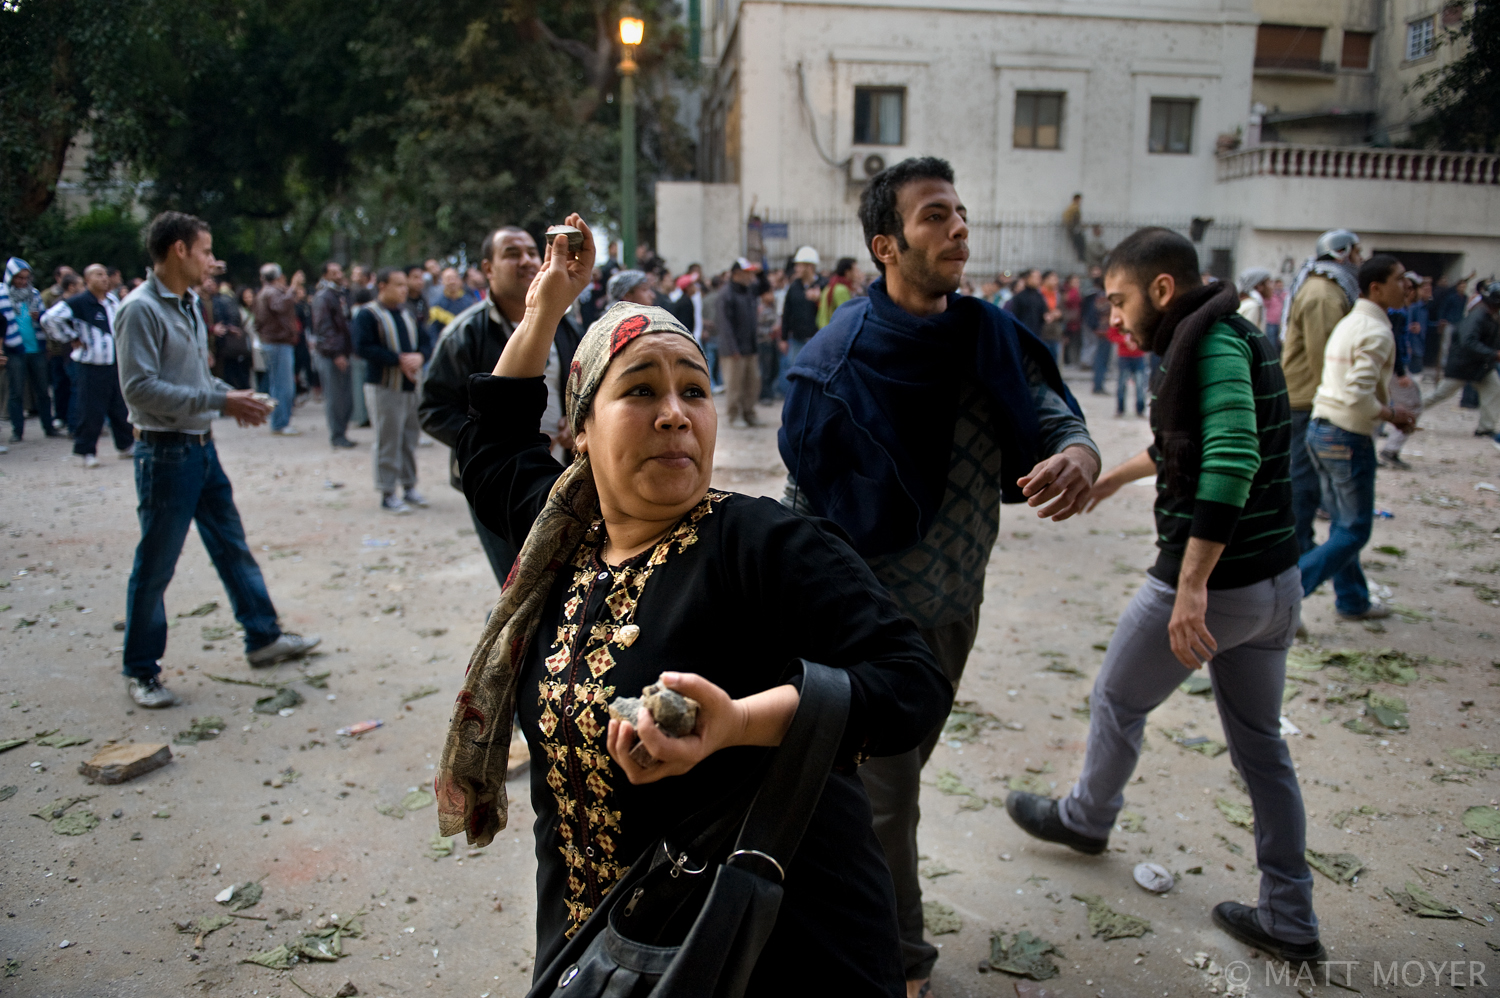  Egyptian protesters throw stones at government forces during clashes that erupted after a pro-democracy sit-in was forcefully broken up by government troops in Cairo, Egypt. 